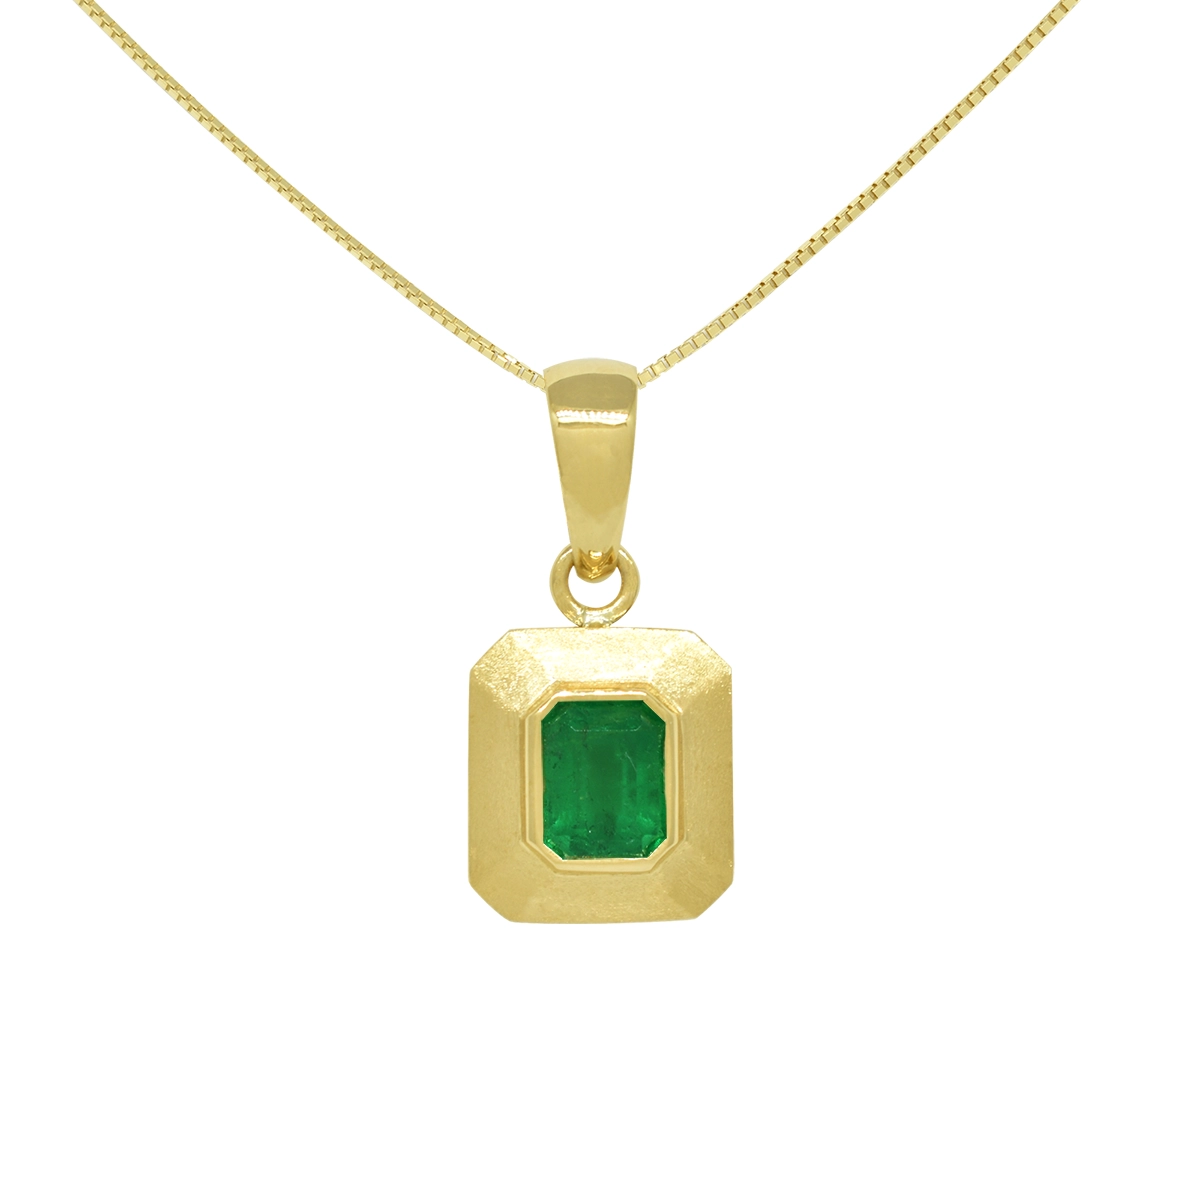 Emerald cut natural Colombian emerald pendant necklace set in solid 18K yellow gold bezel set with brush finish creating a rich texture around the gem